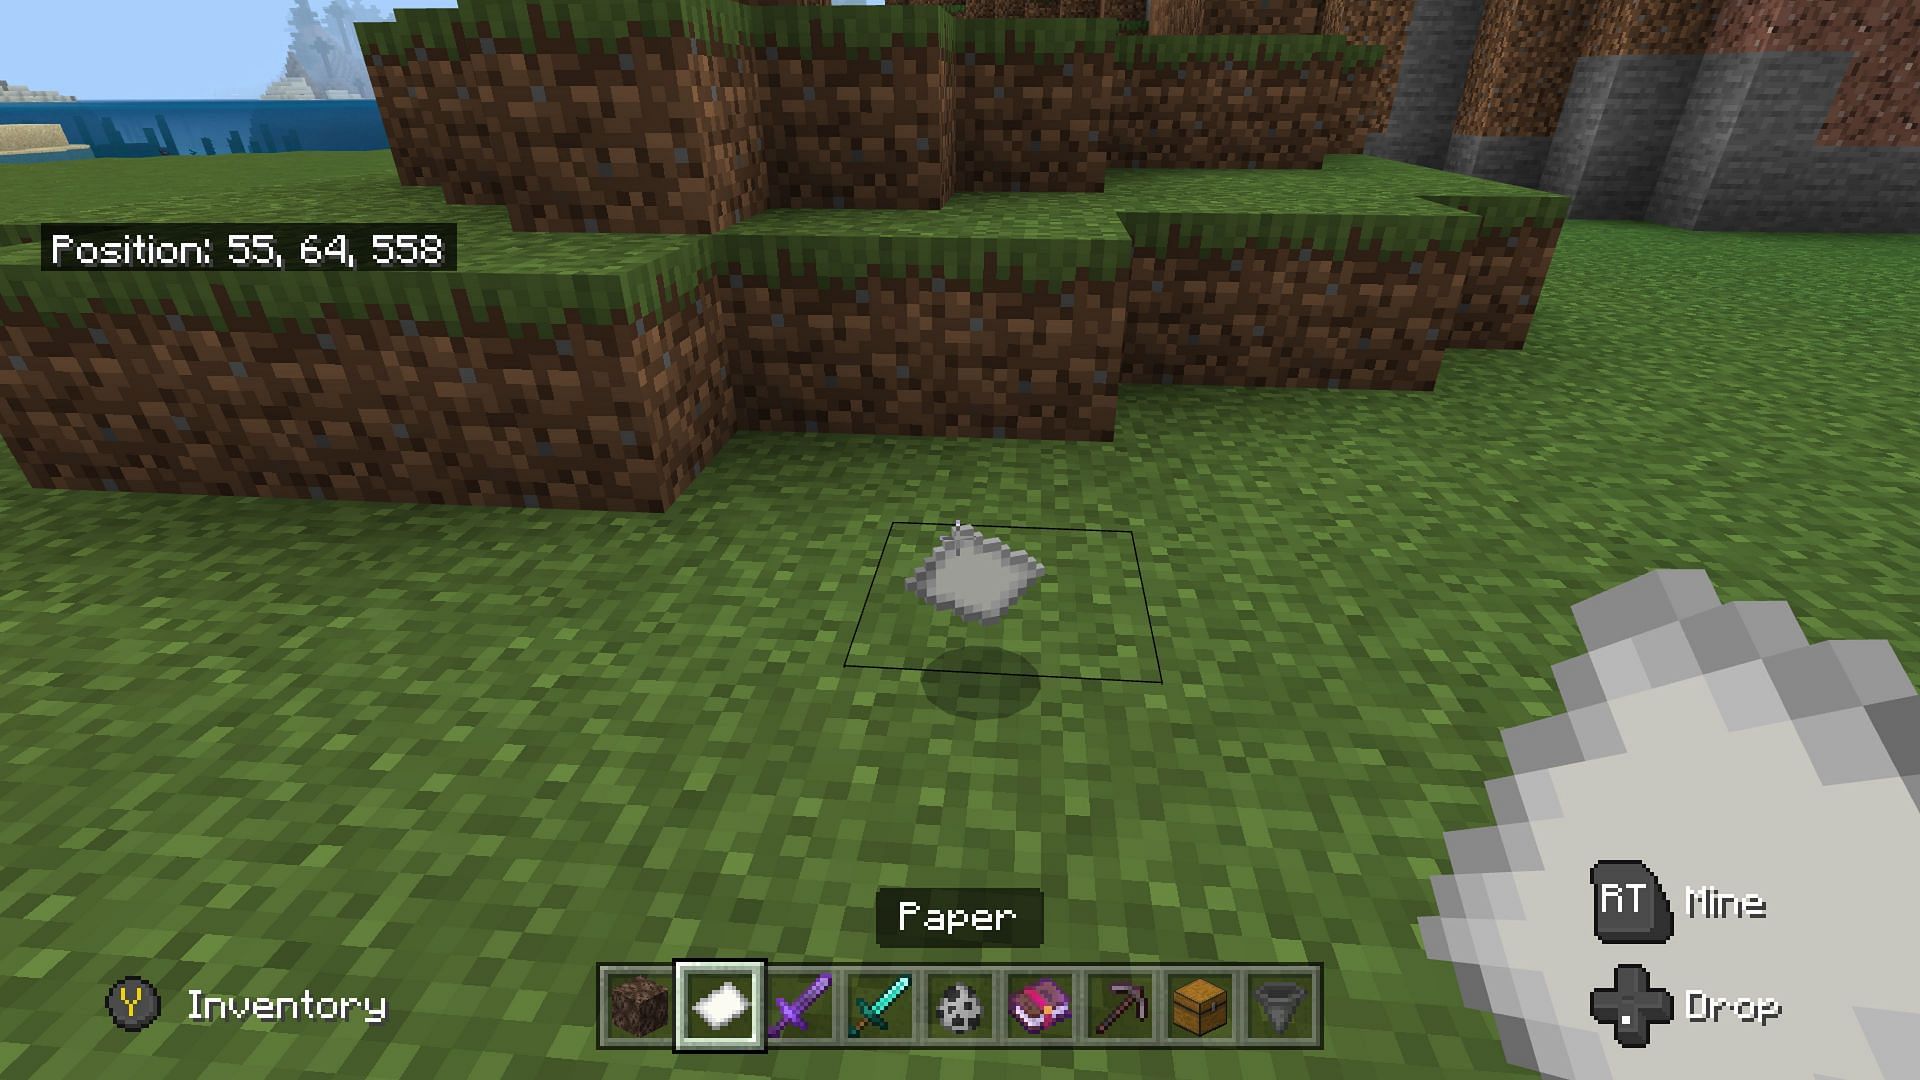 Paper is created from sugar cane in Minecraft (Image via Mojang)